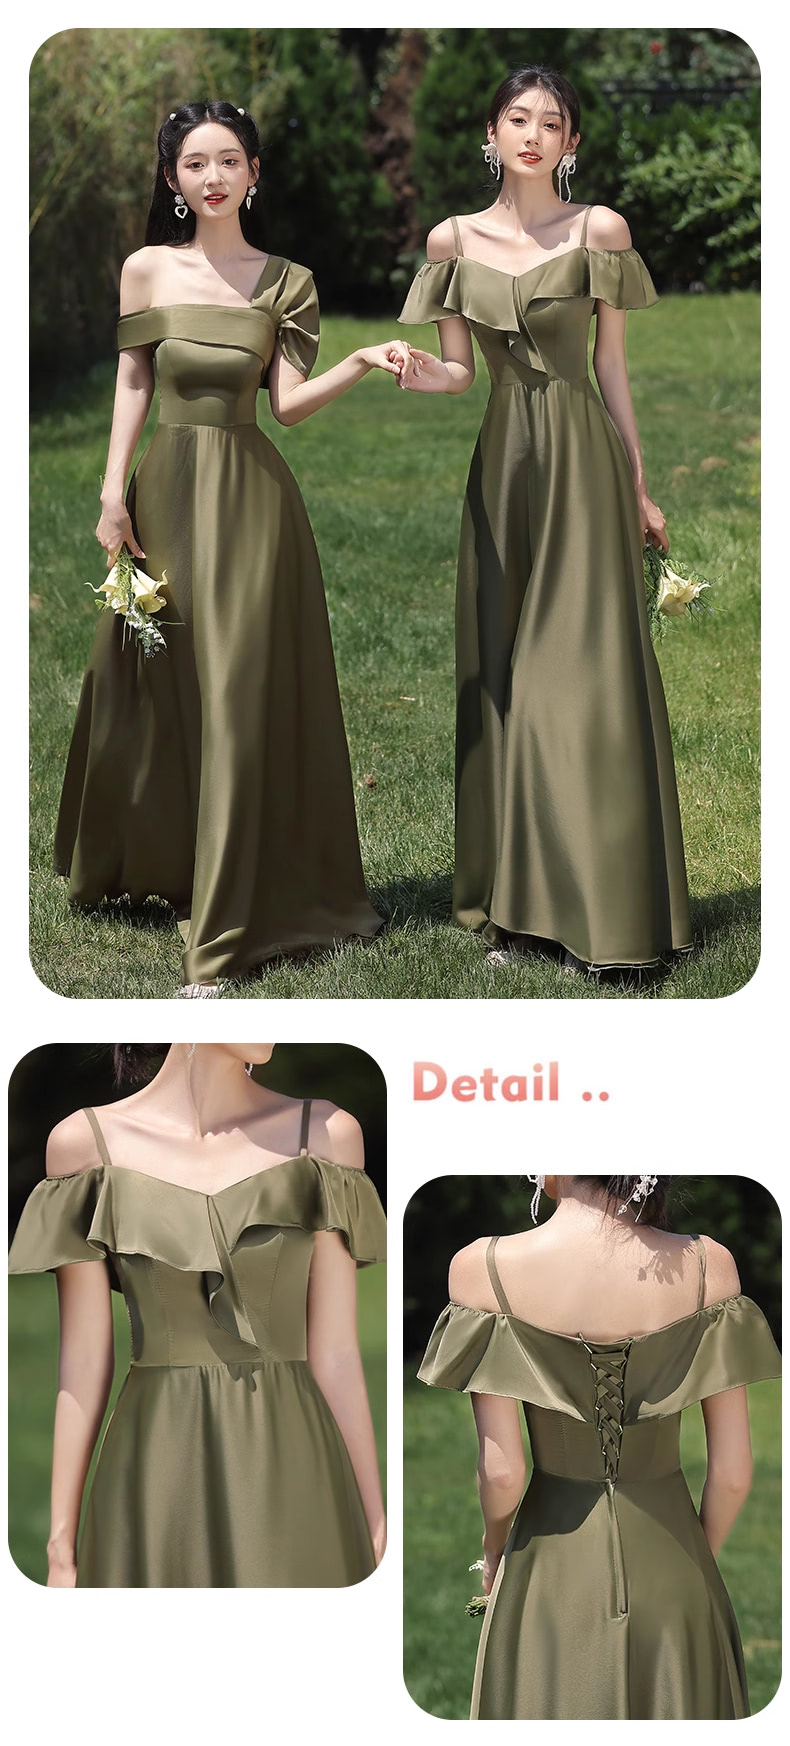 Simple-Green-Satin-Bridesmaid-Dress-Cocktail-Prom-Evening-Gowns17